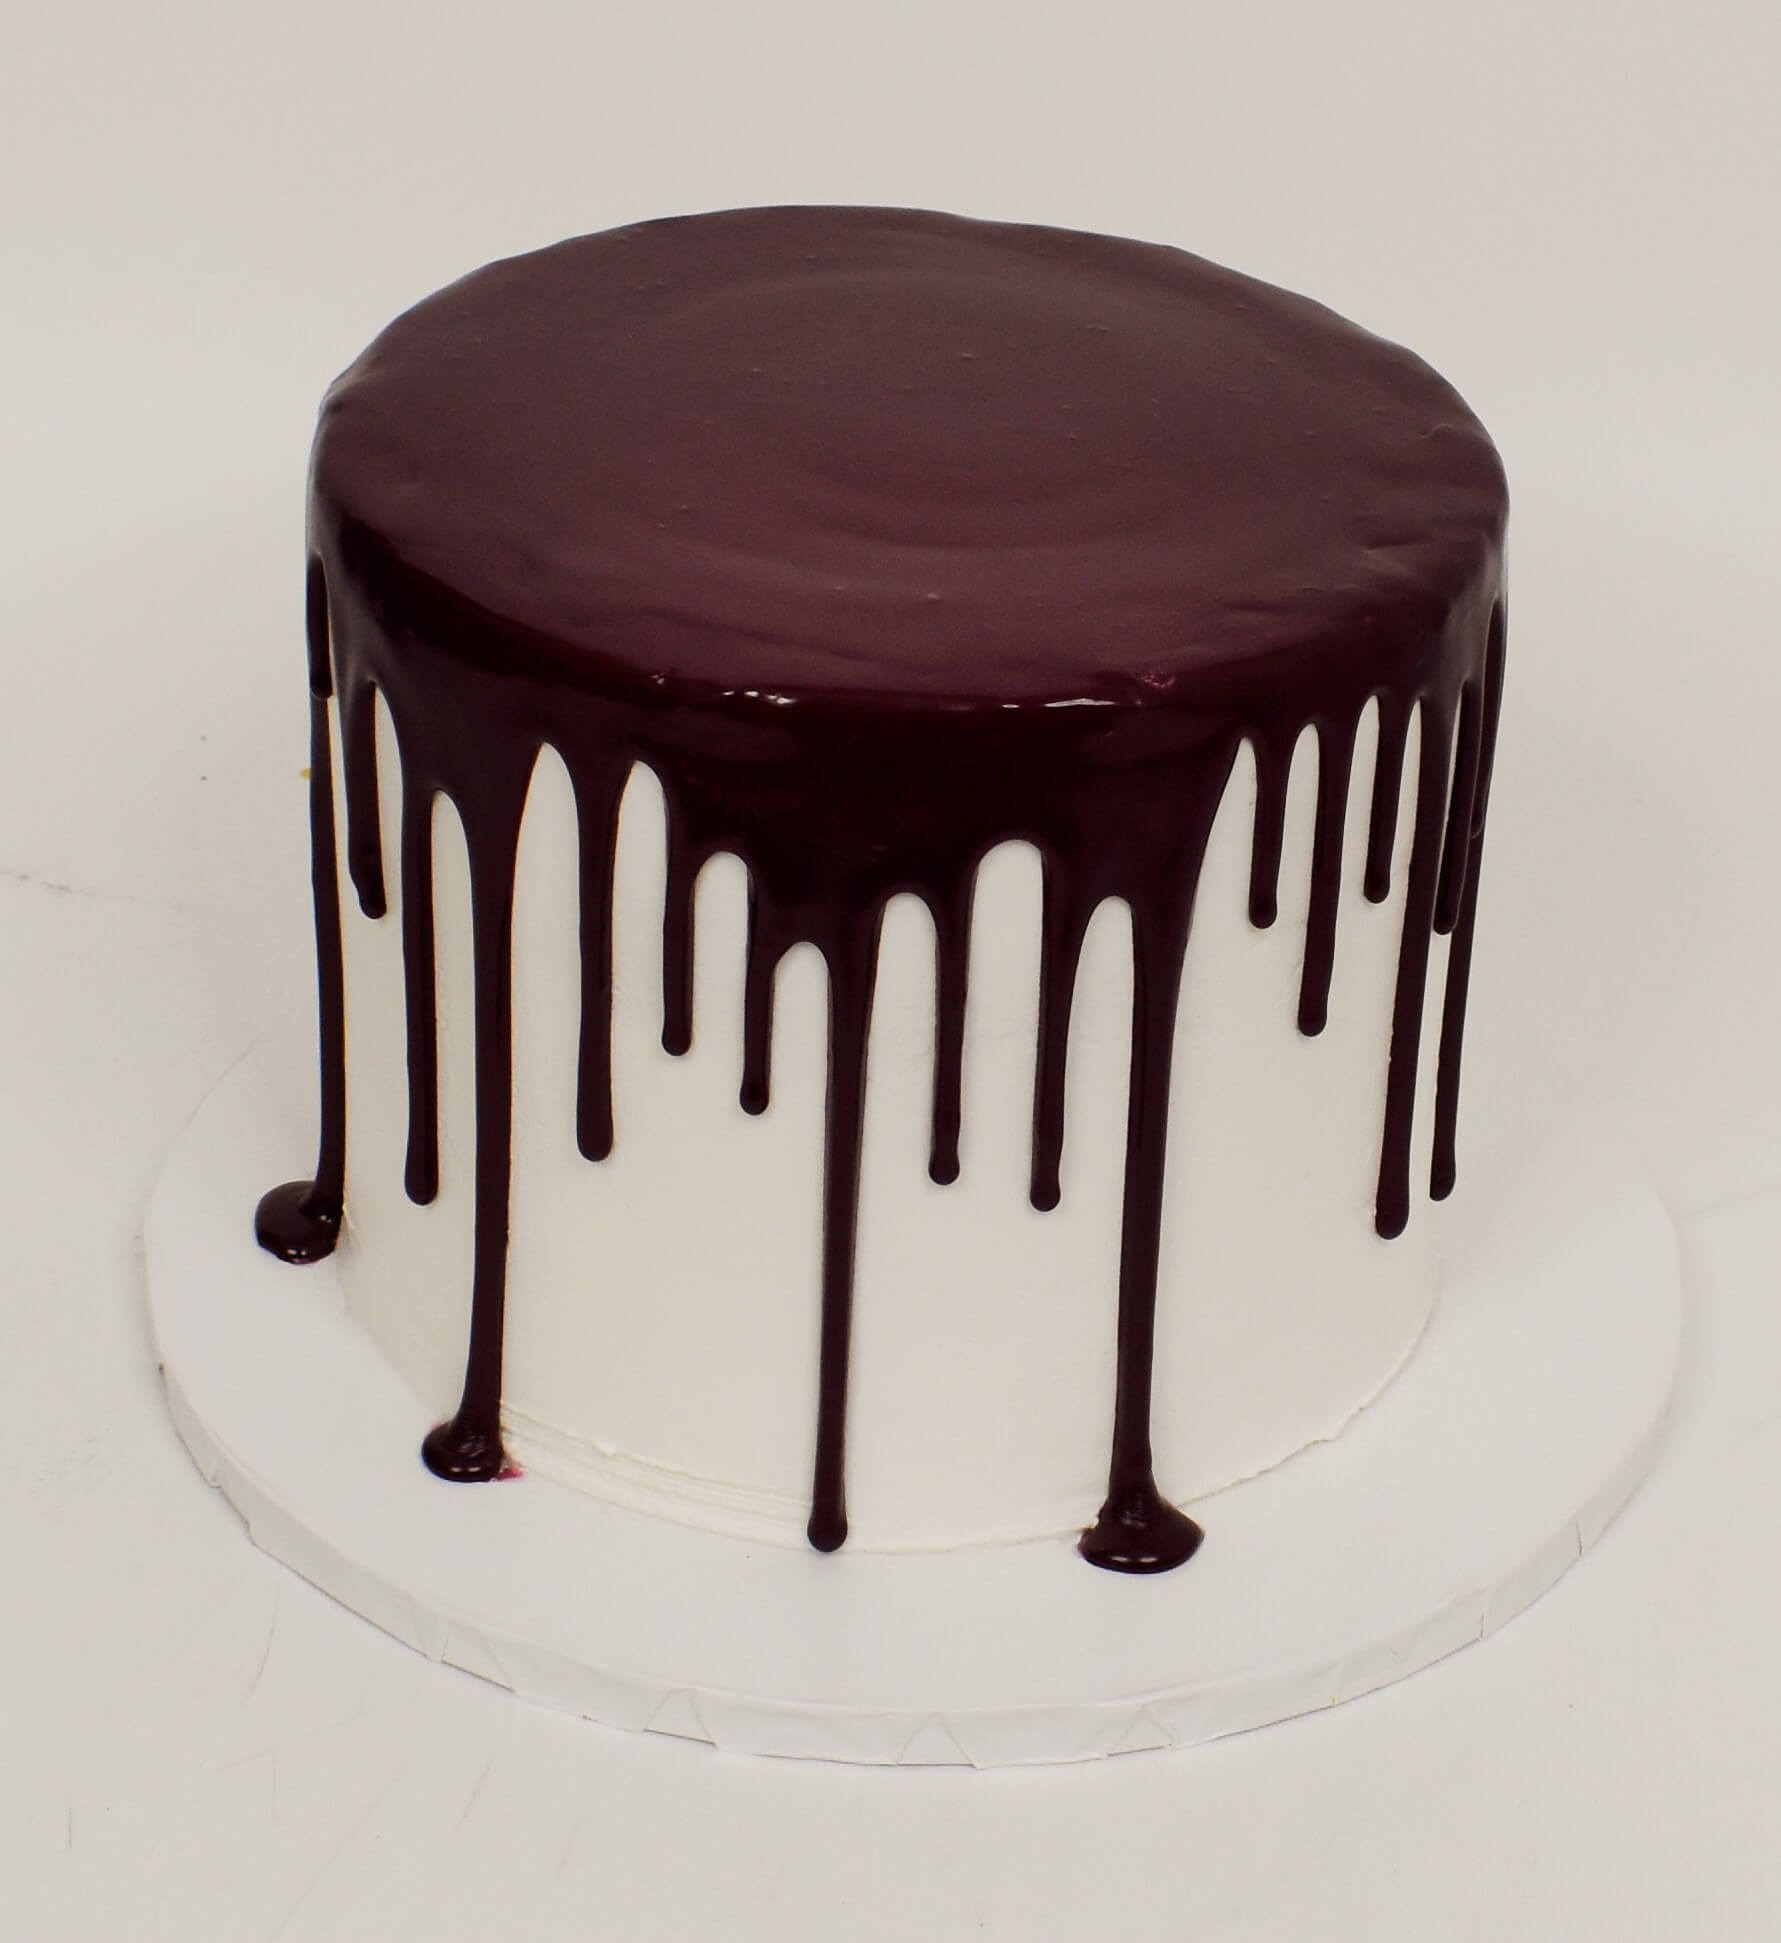 McArthur's Bakery Custom Cake With Chocolate Icing Dripping Down Cake